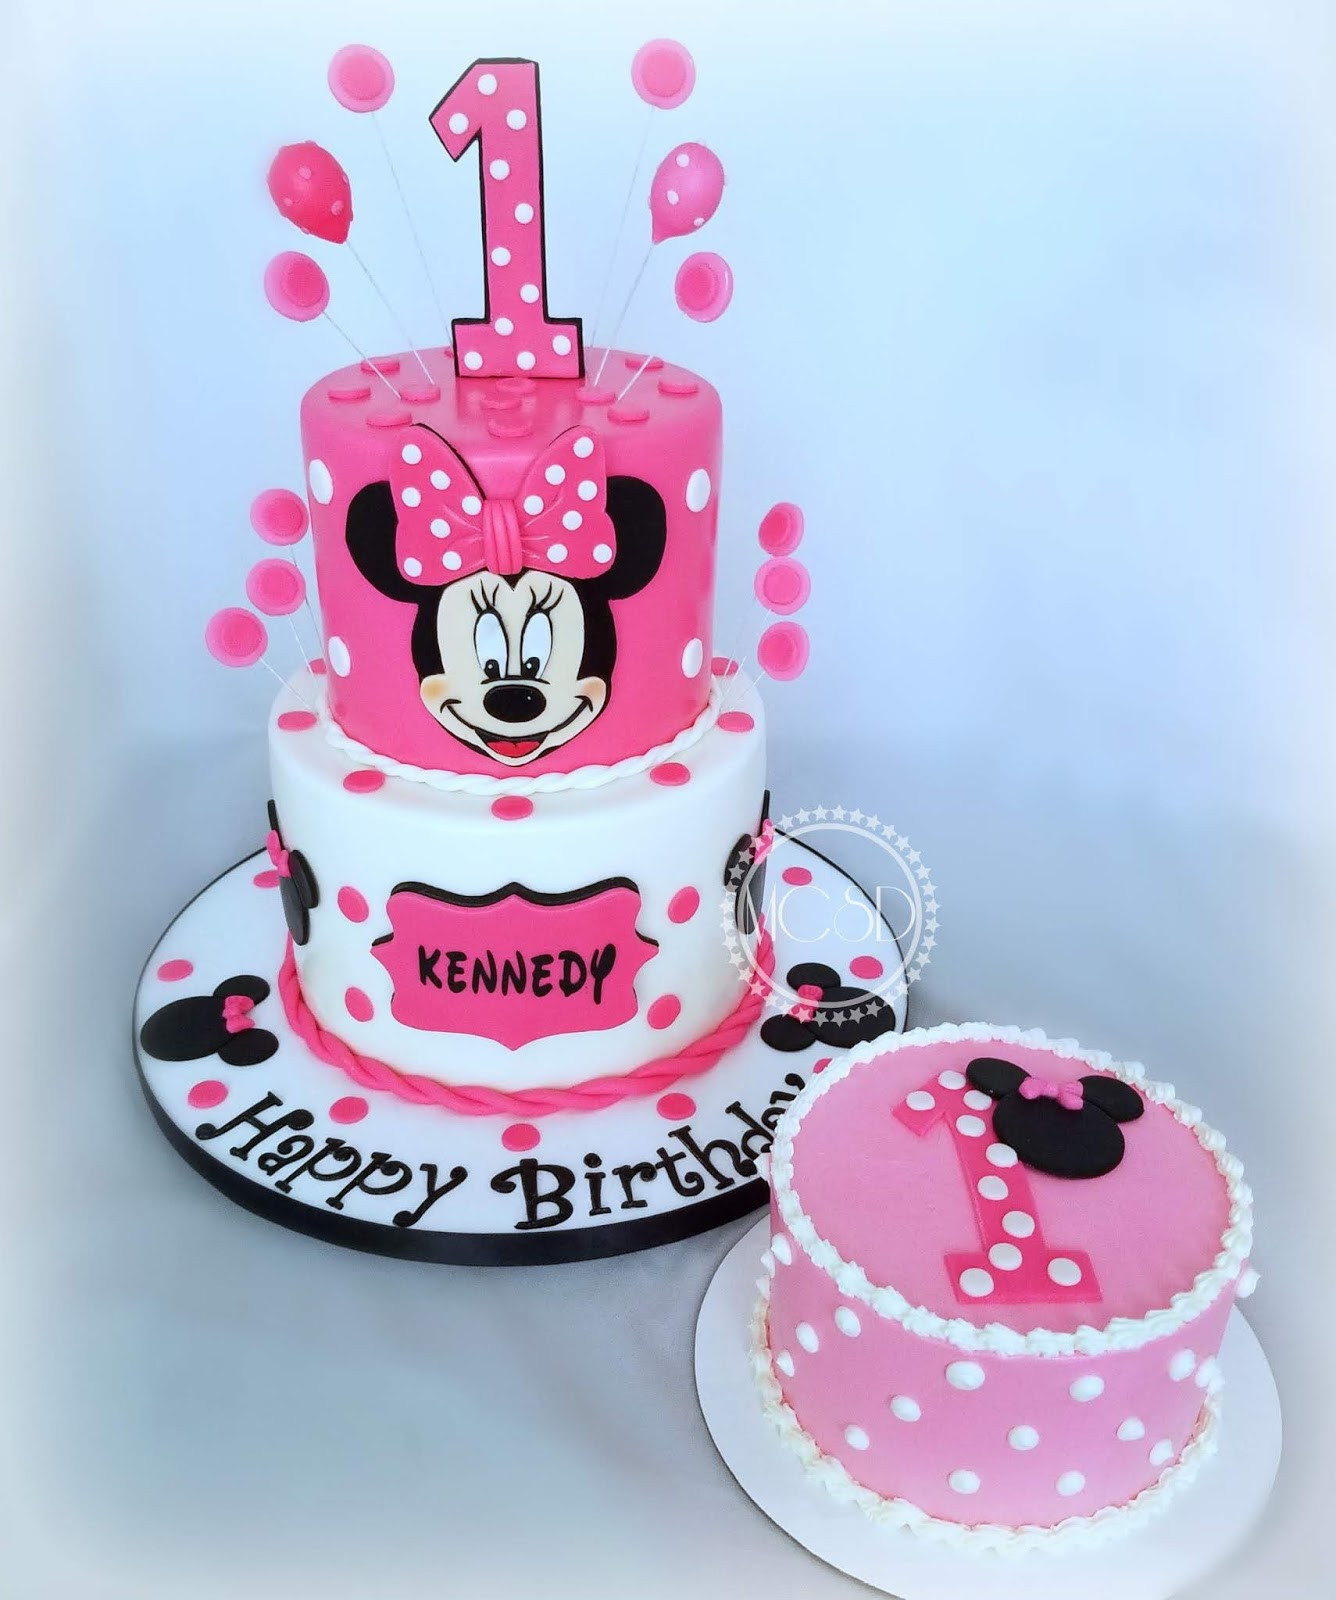 Minnie Mouse 1st Birthday Cakes
 MyCakeSweetDreams Minnie Mouse 1st Birthday Cake